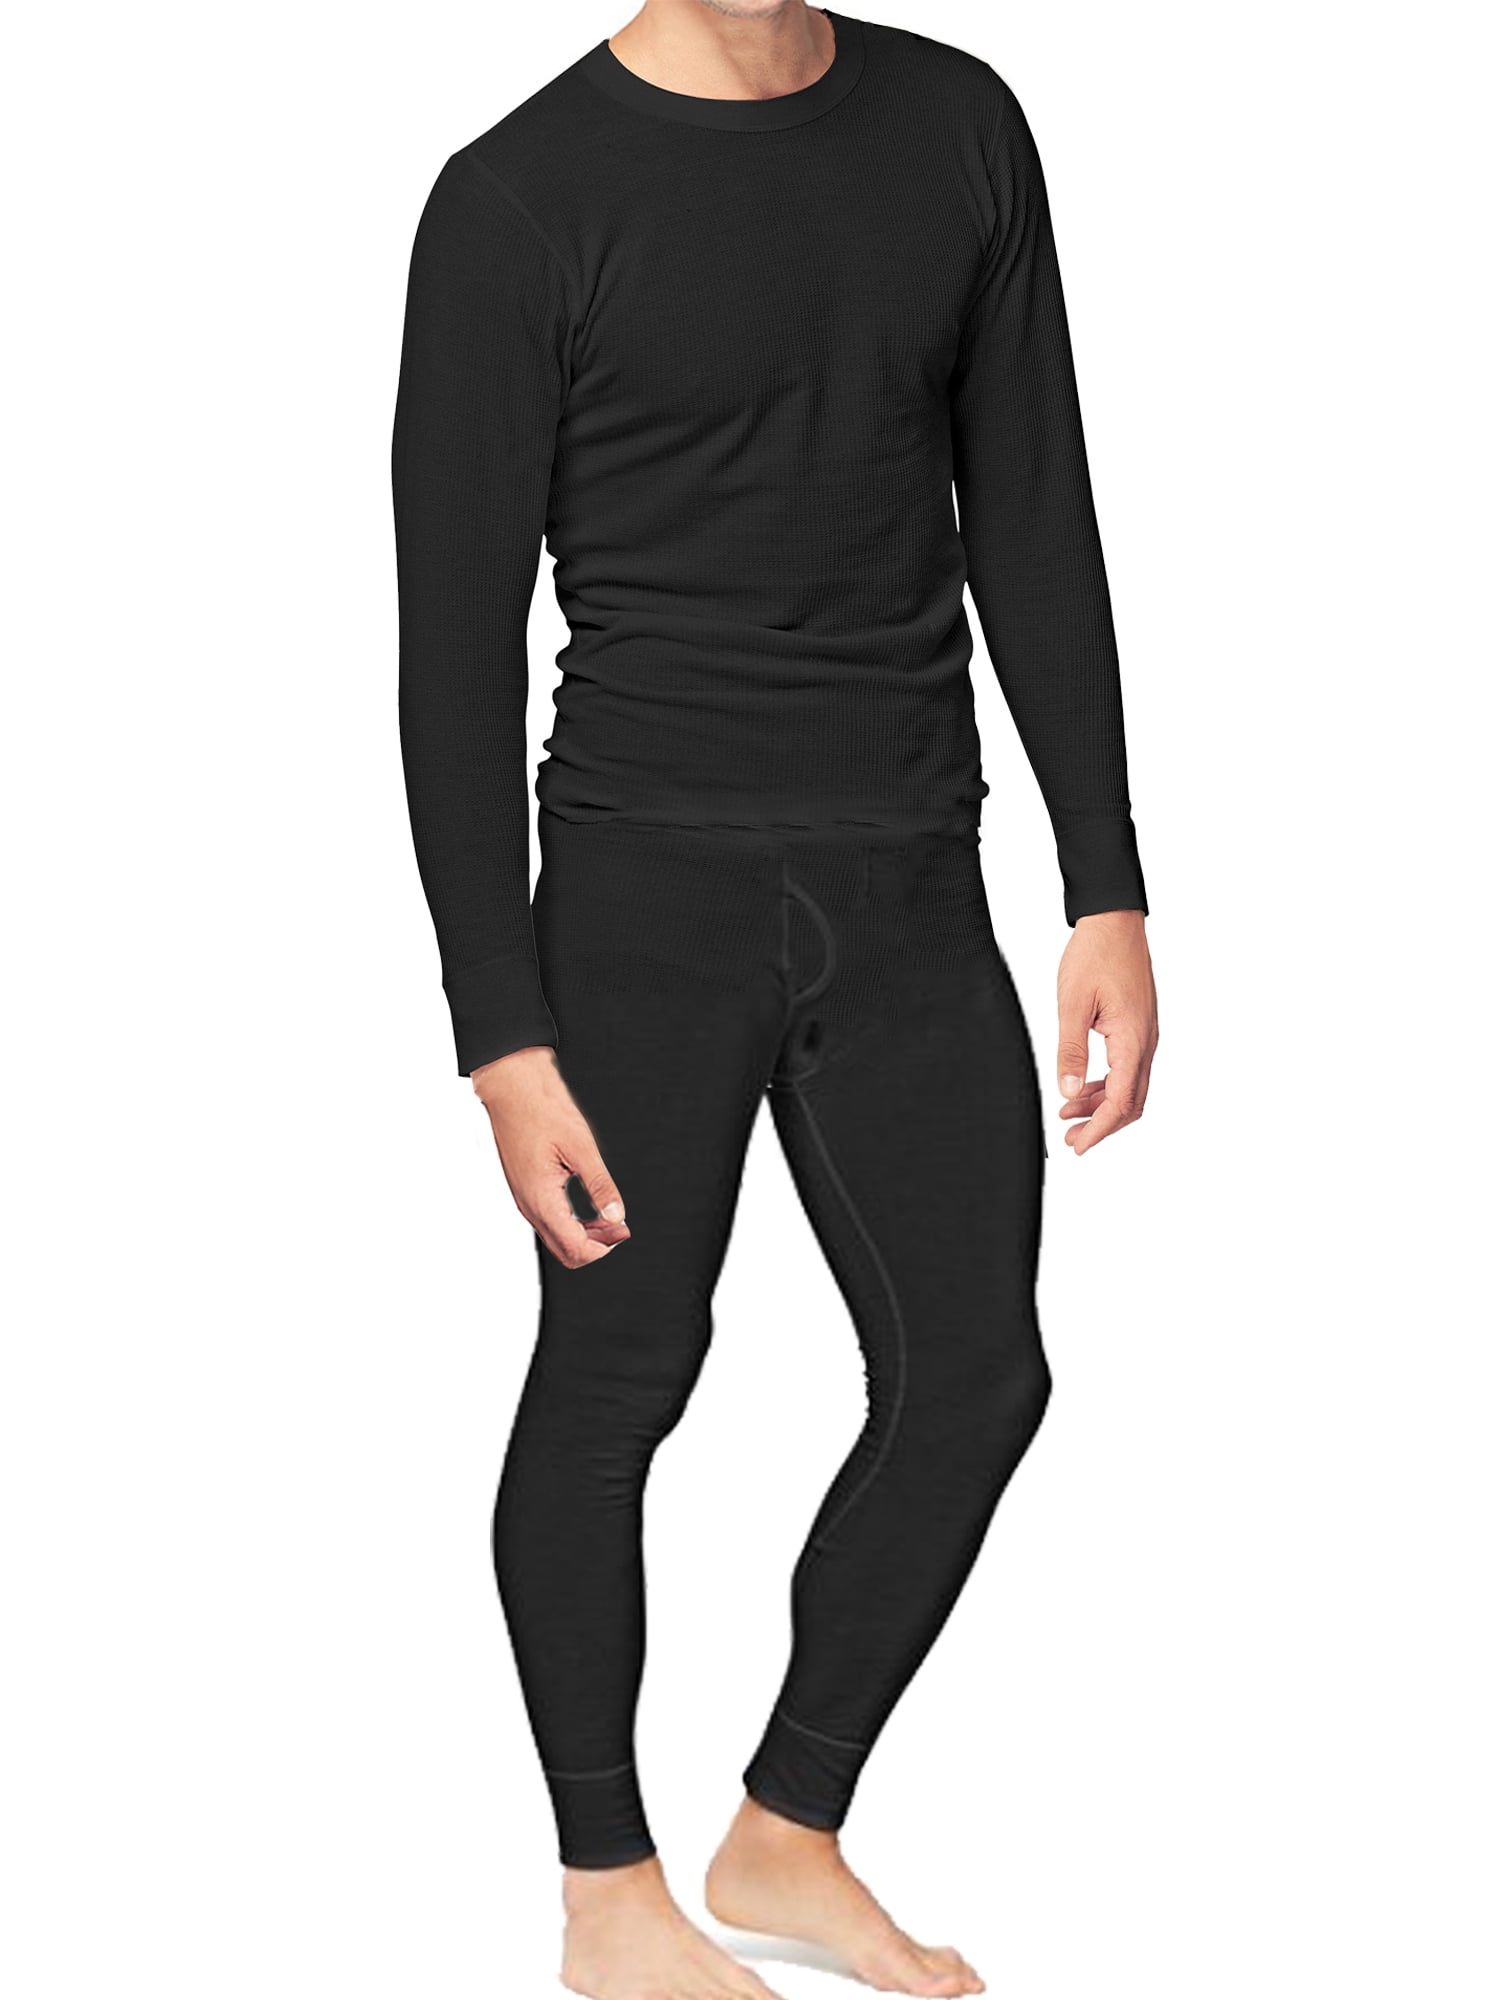 Essential's Men's Big and Tall Thermal Waffle Knit Long Johns